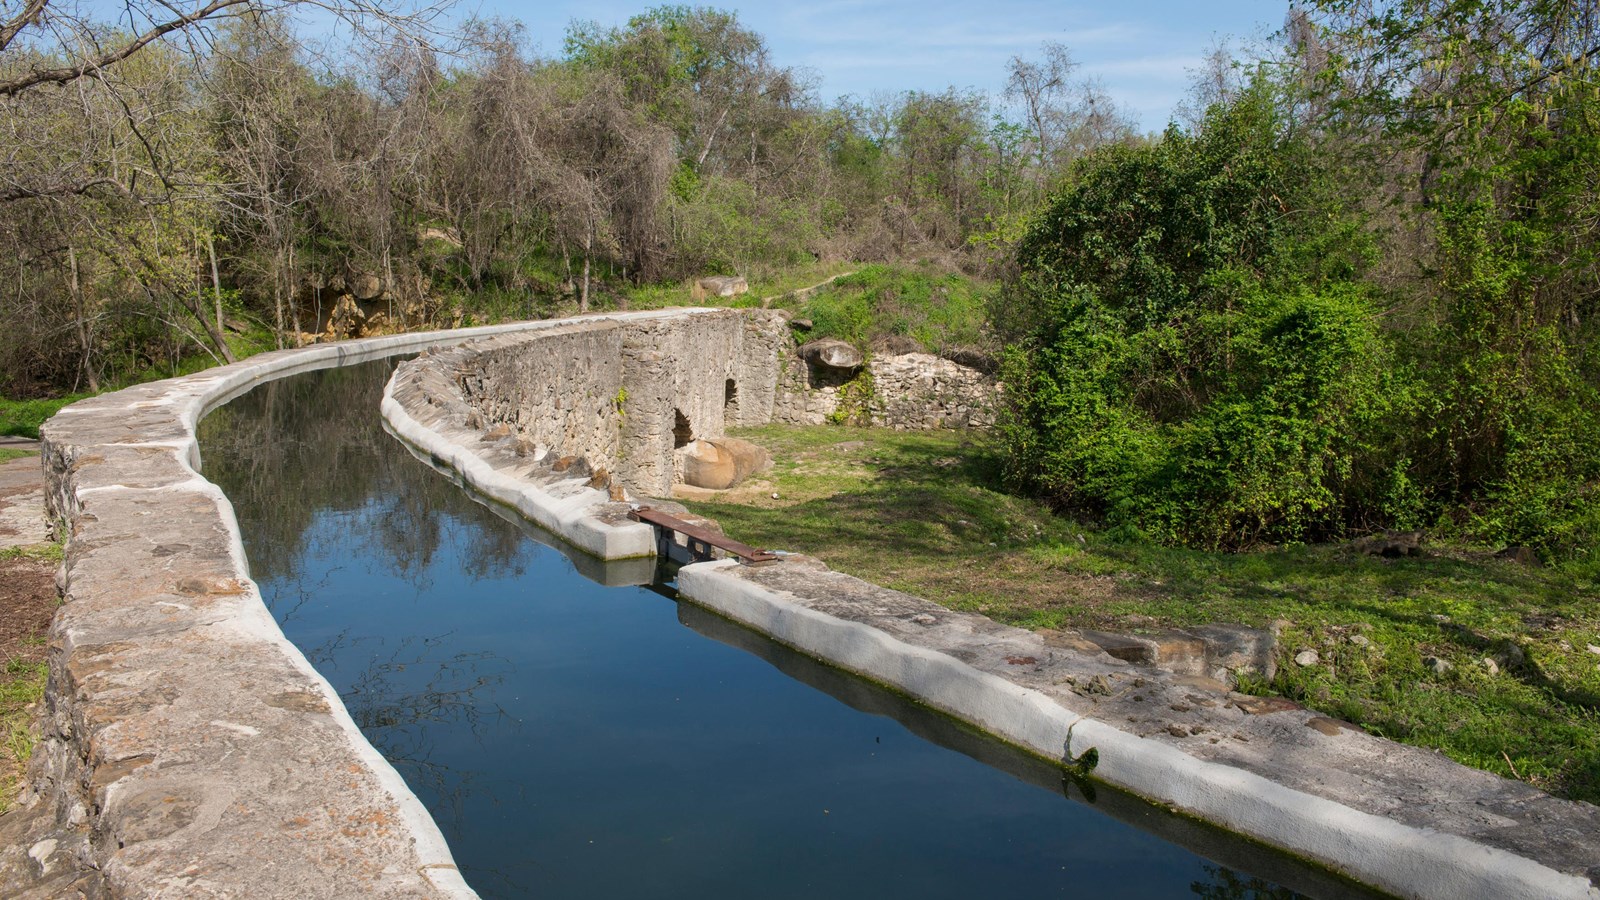 Limestone aqueduct with arches carries water over Six Mile Creek below